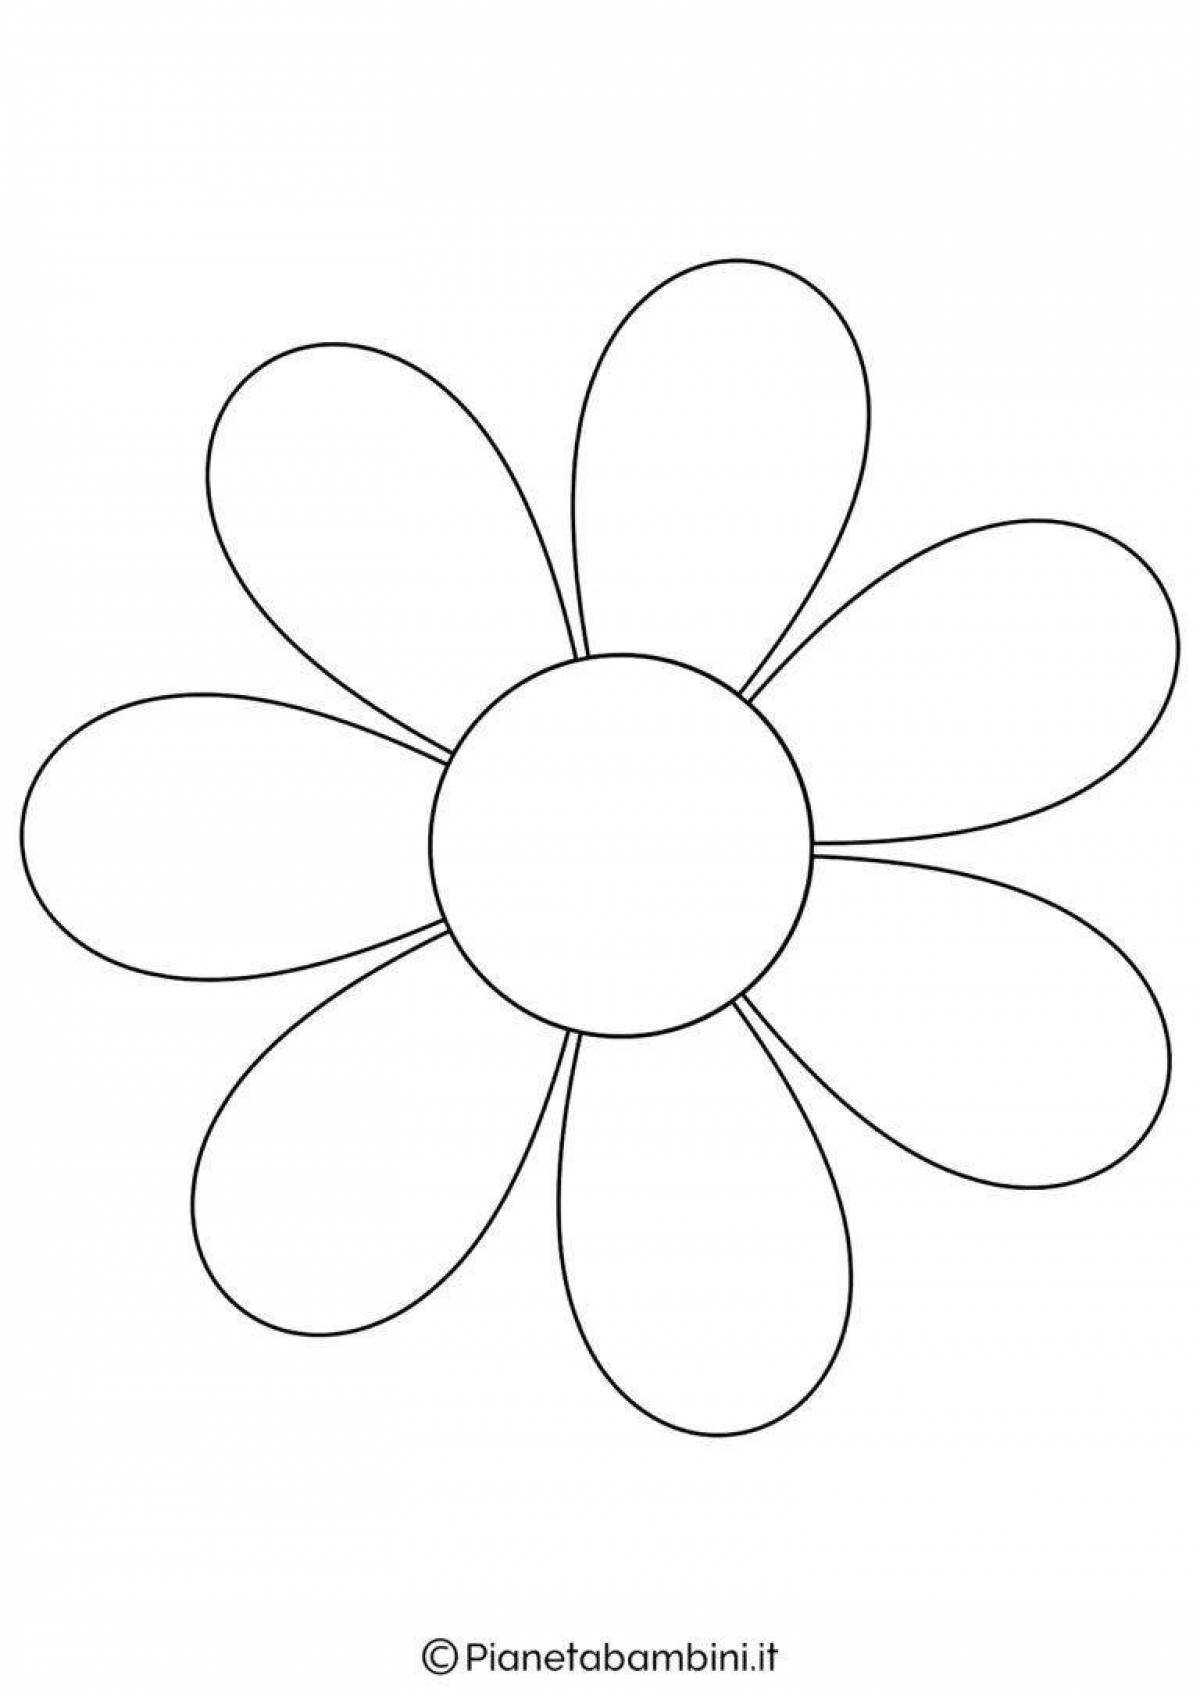 Dazzling coloring page flower seven-flower template